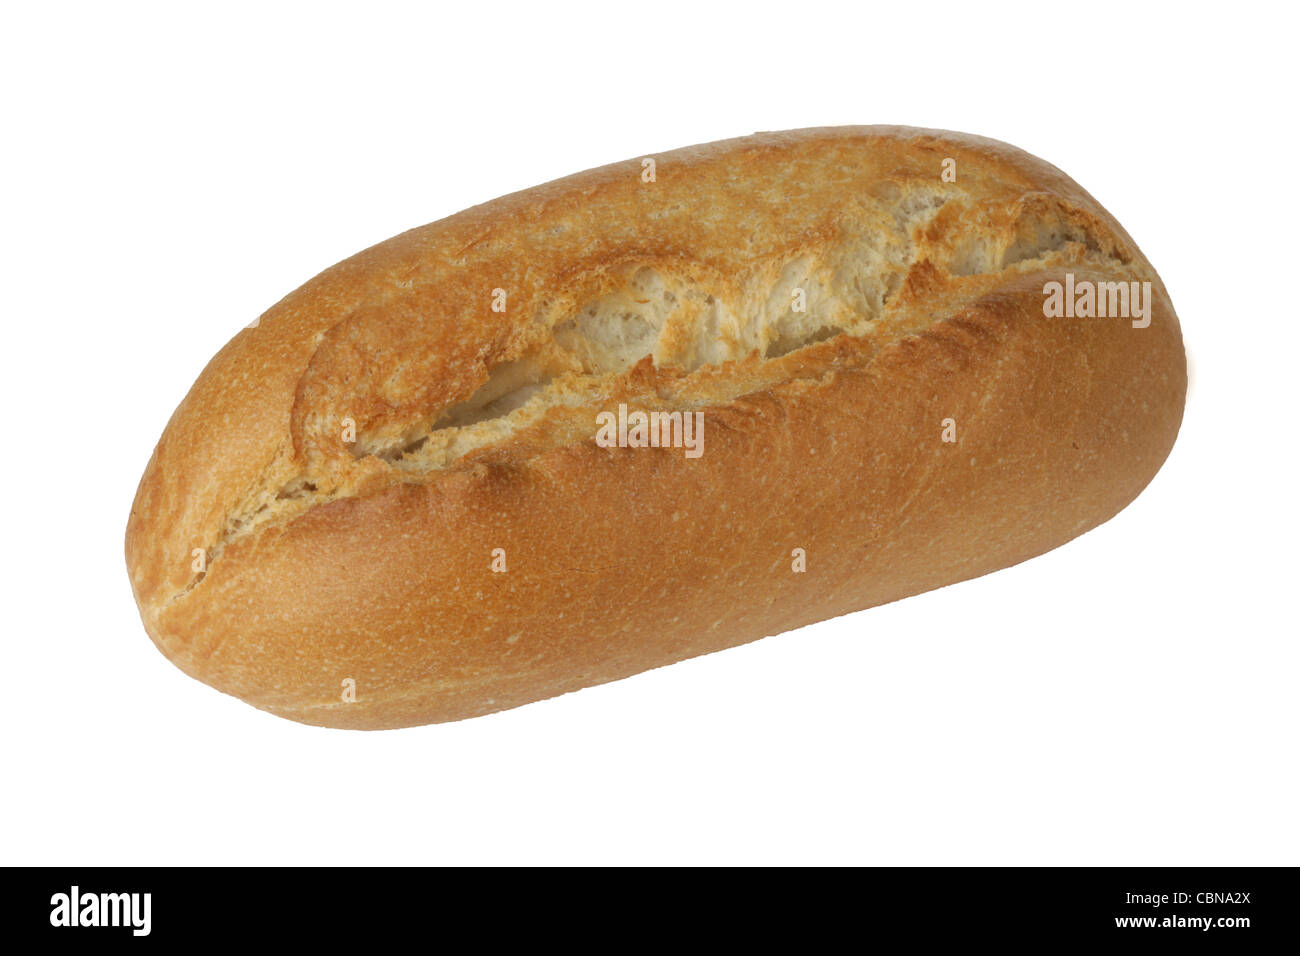 Crusty Fresh White Bread Roll Isolated Against A White Background With No  People And A Clipping Path Stock Photo - Alamy